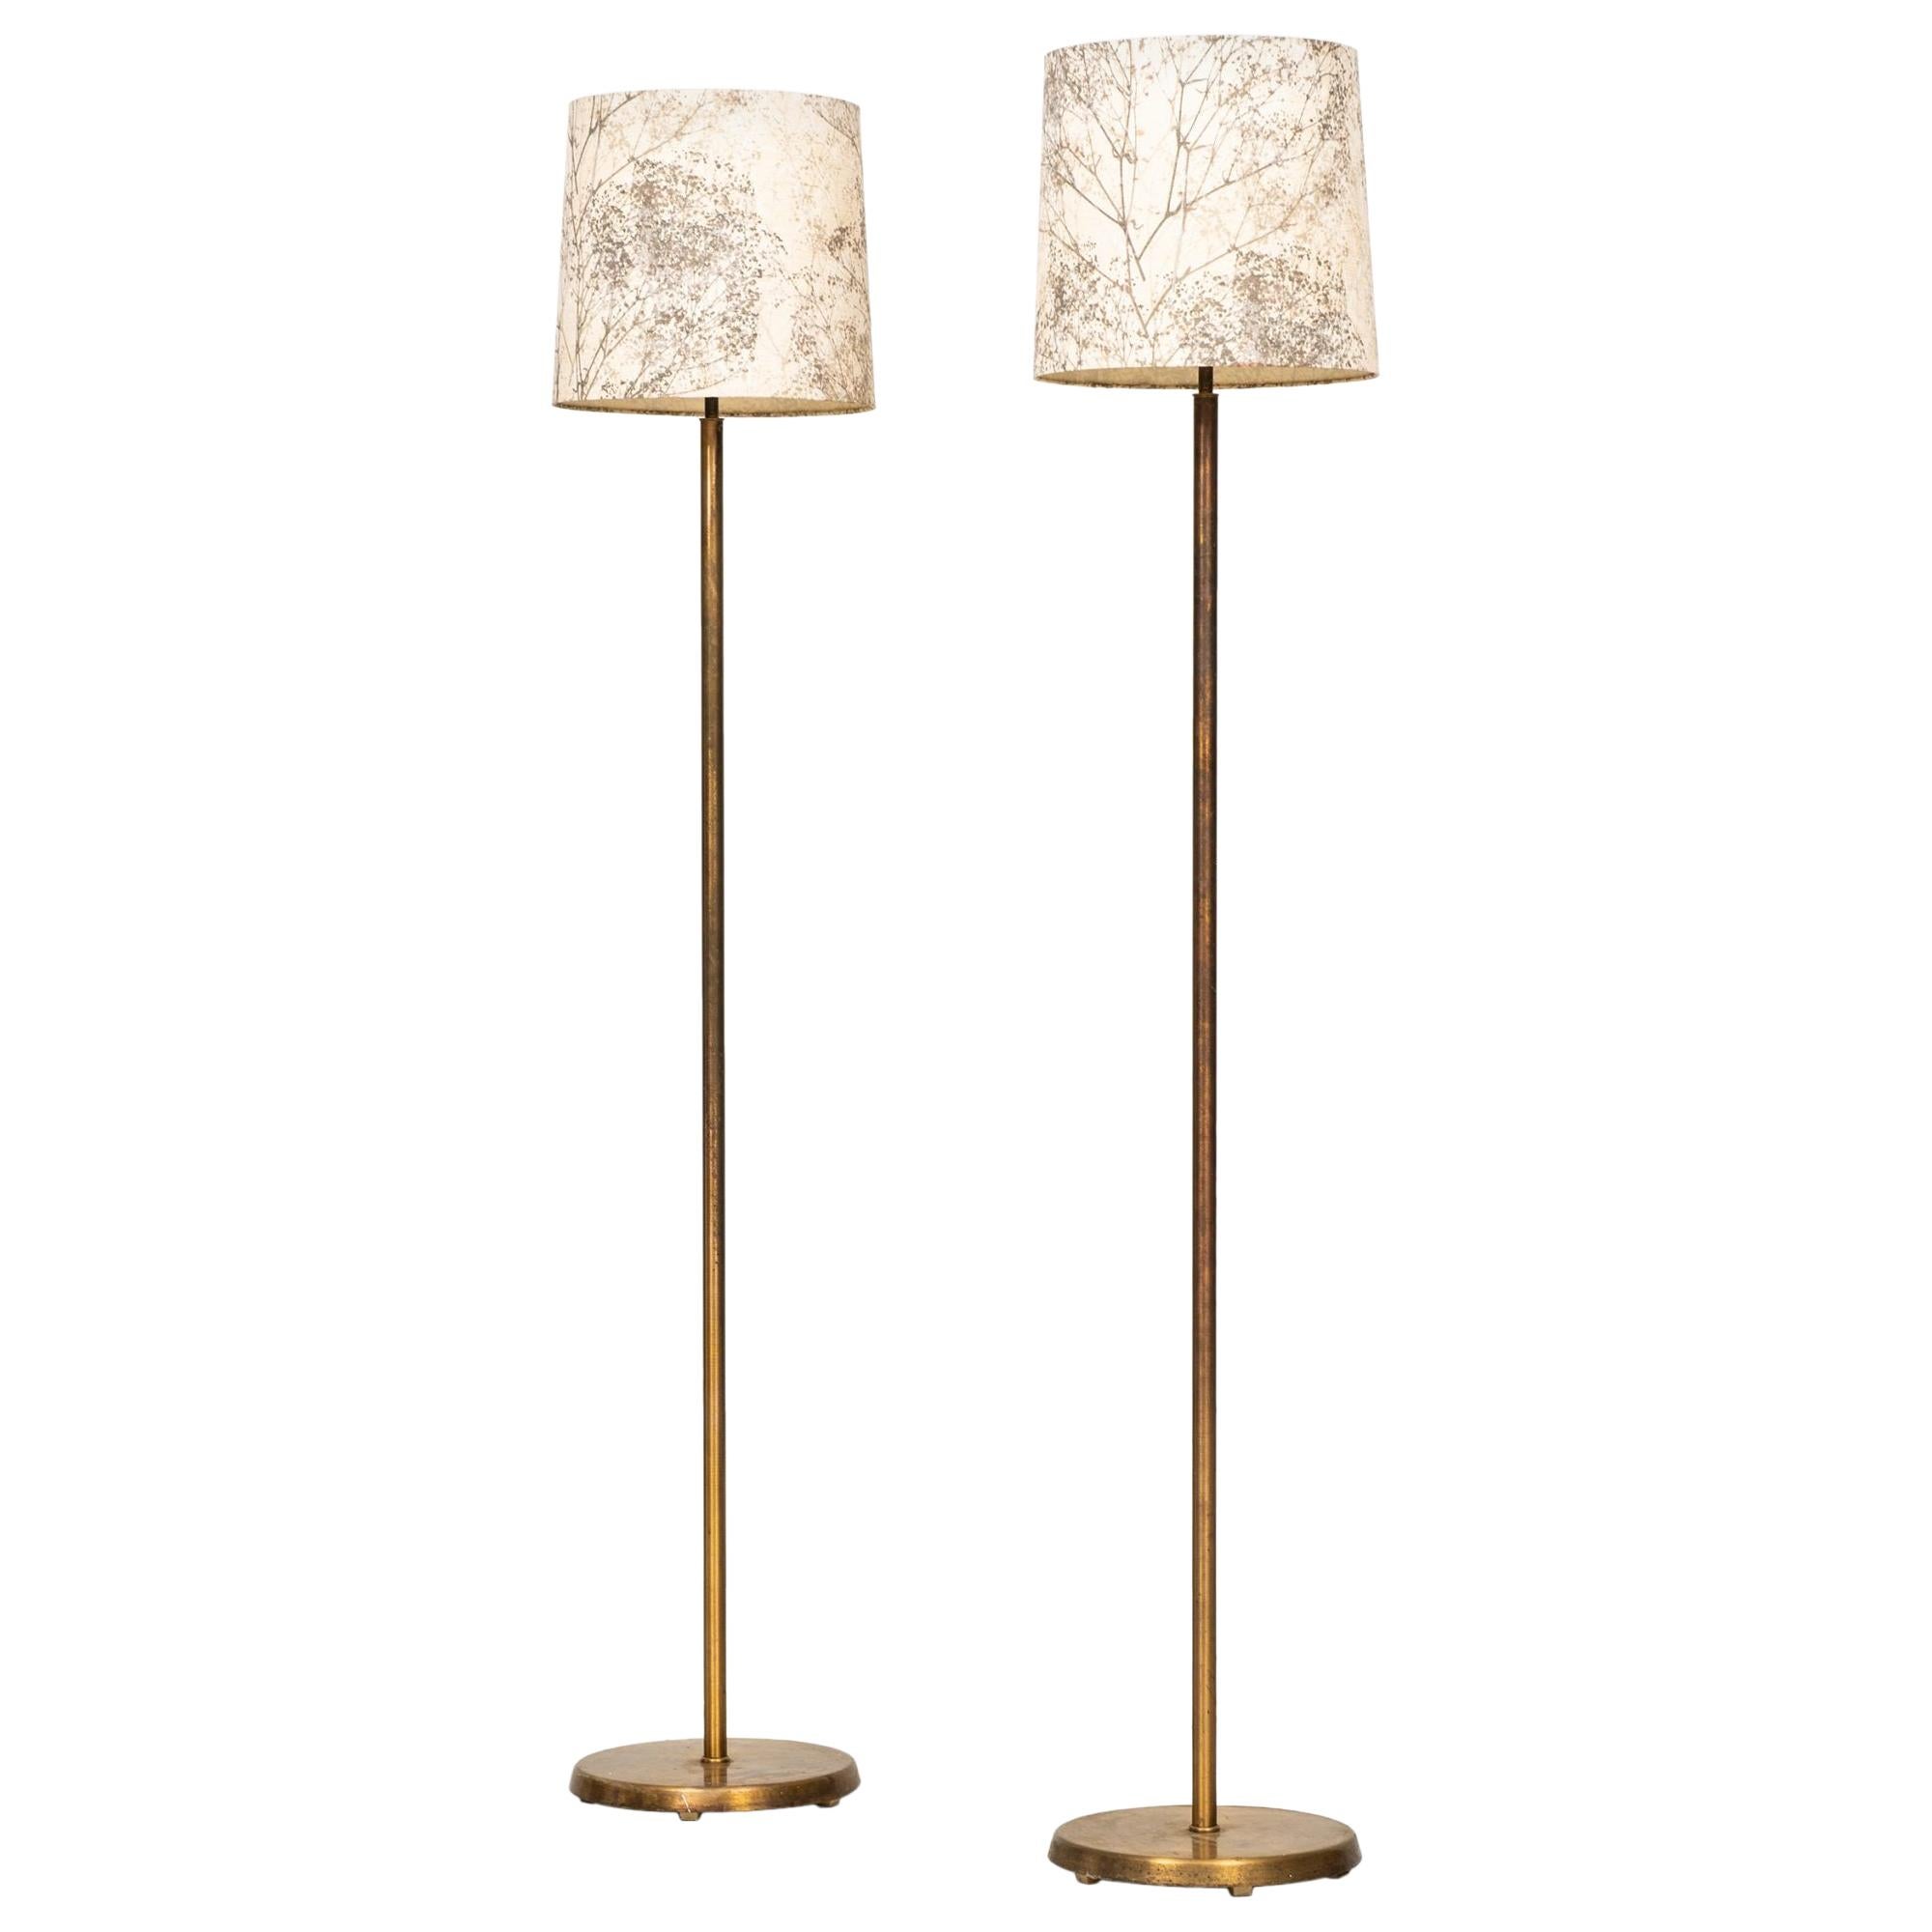 Floor Lamps Attributed to Hans Bergström Produced by ASEA in Sweden